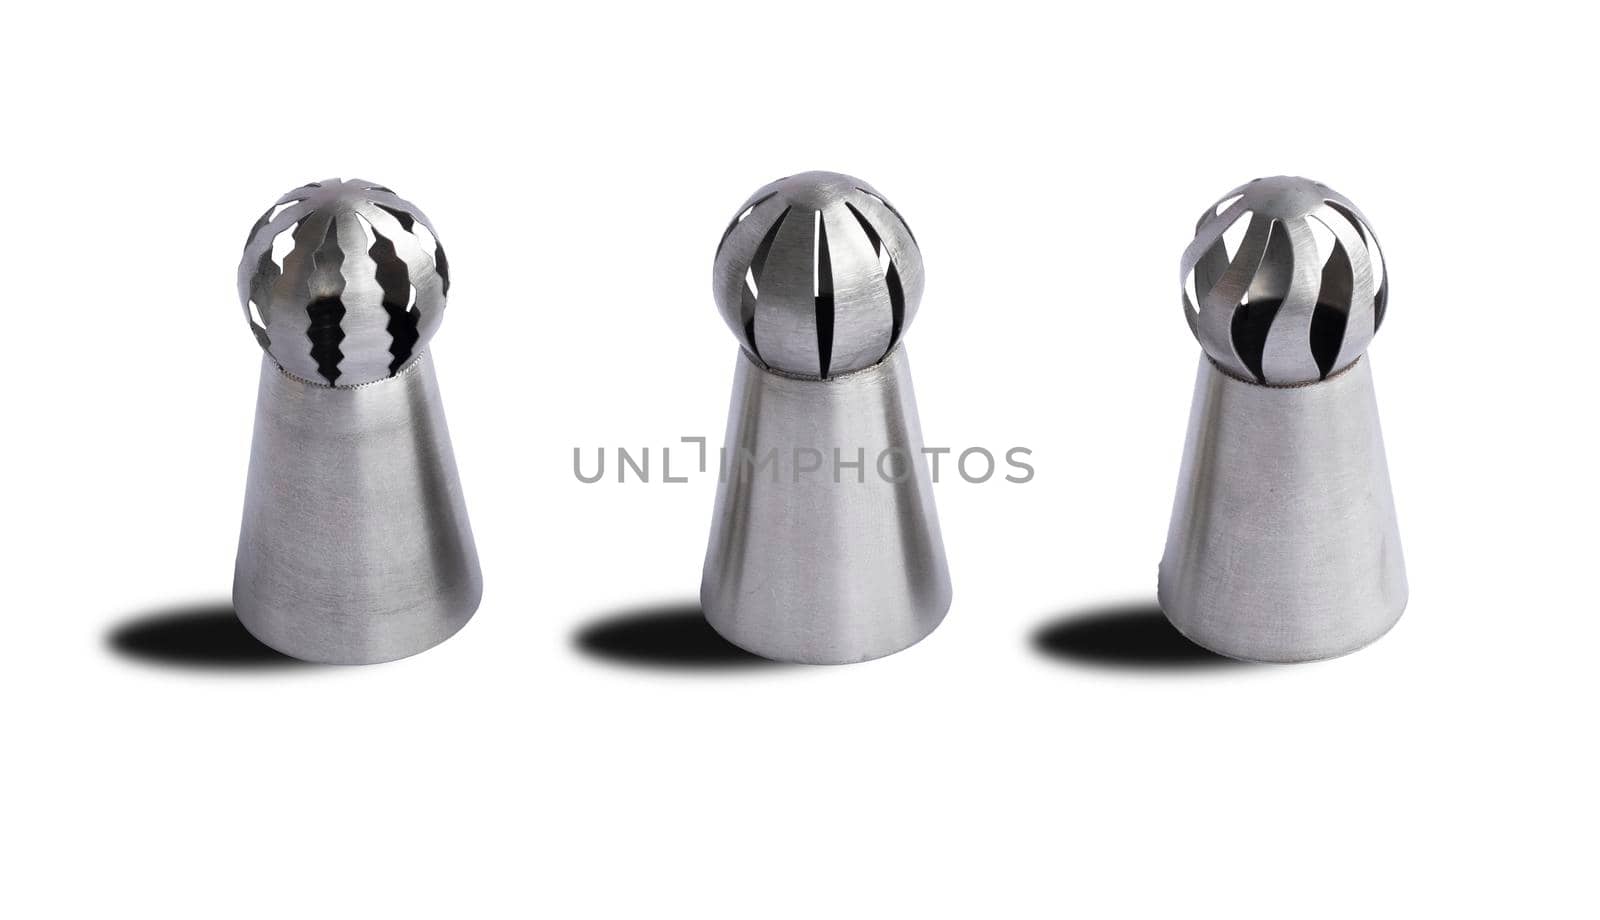 Steel Sphere Ball Tips Russian Icing Piping Nozzles Tips Pastry Cake Fondant Cupcake Buttercream DIY Baking Tools. pattern on a white background. Confectionery nozzles for confectionery bag.